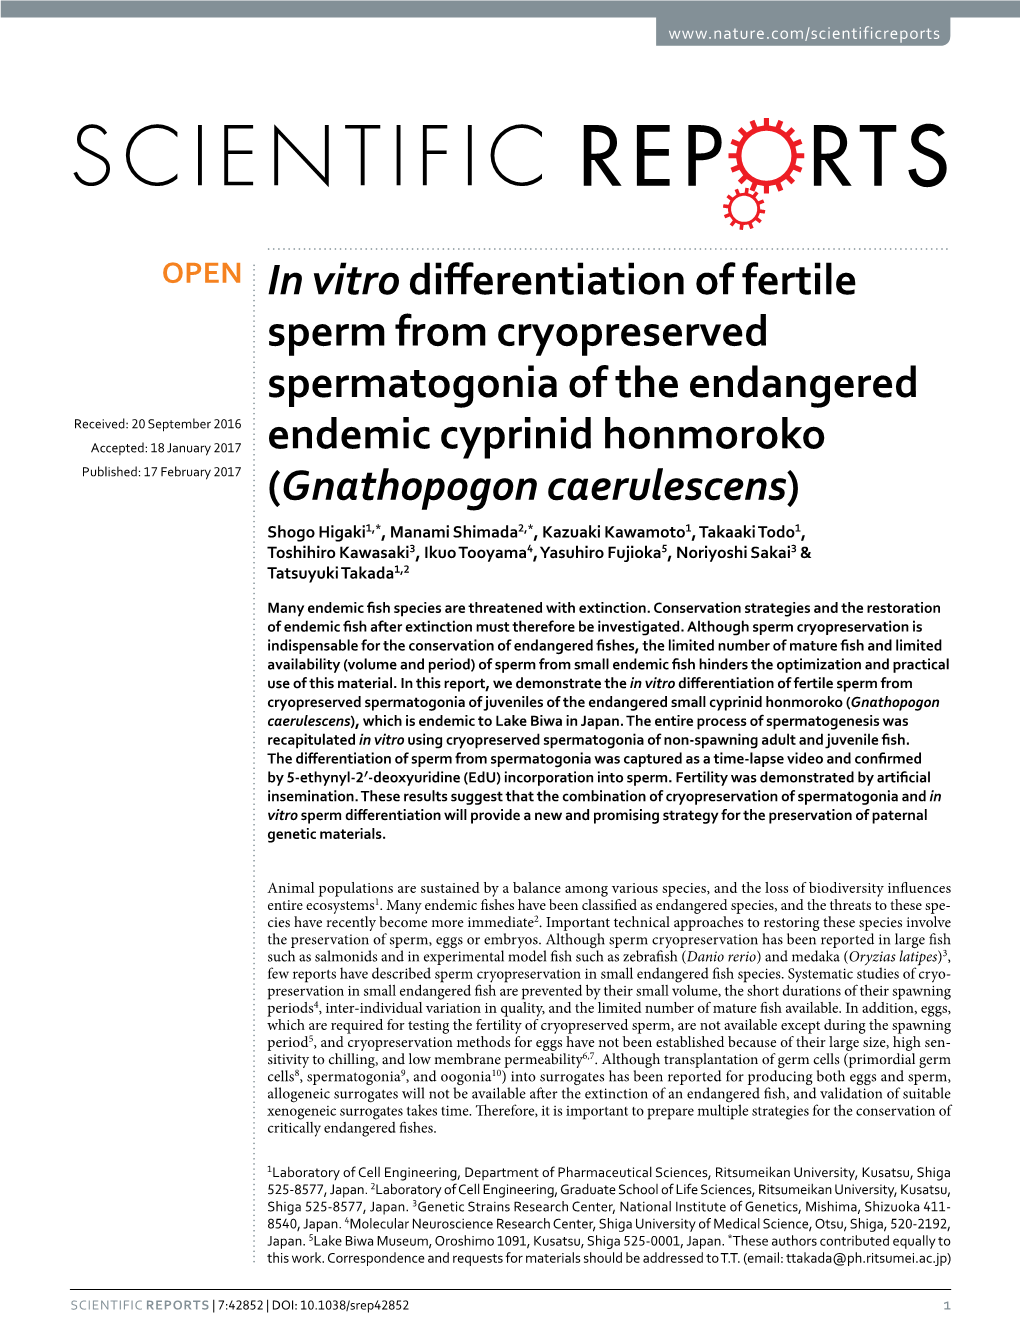 In Vitro Differentiation of Fertile Sperm from Cryopreserved